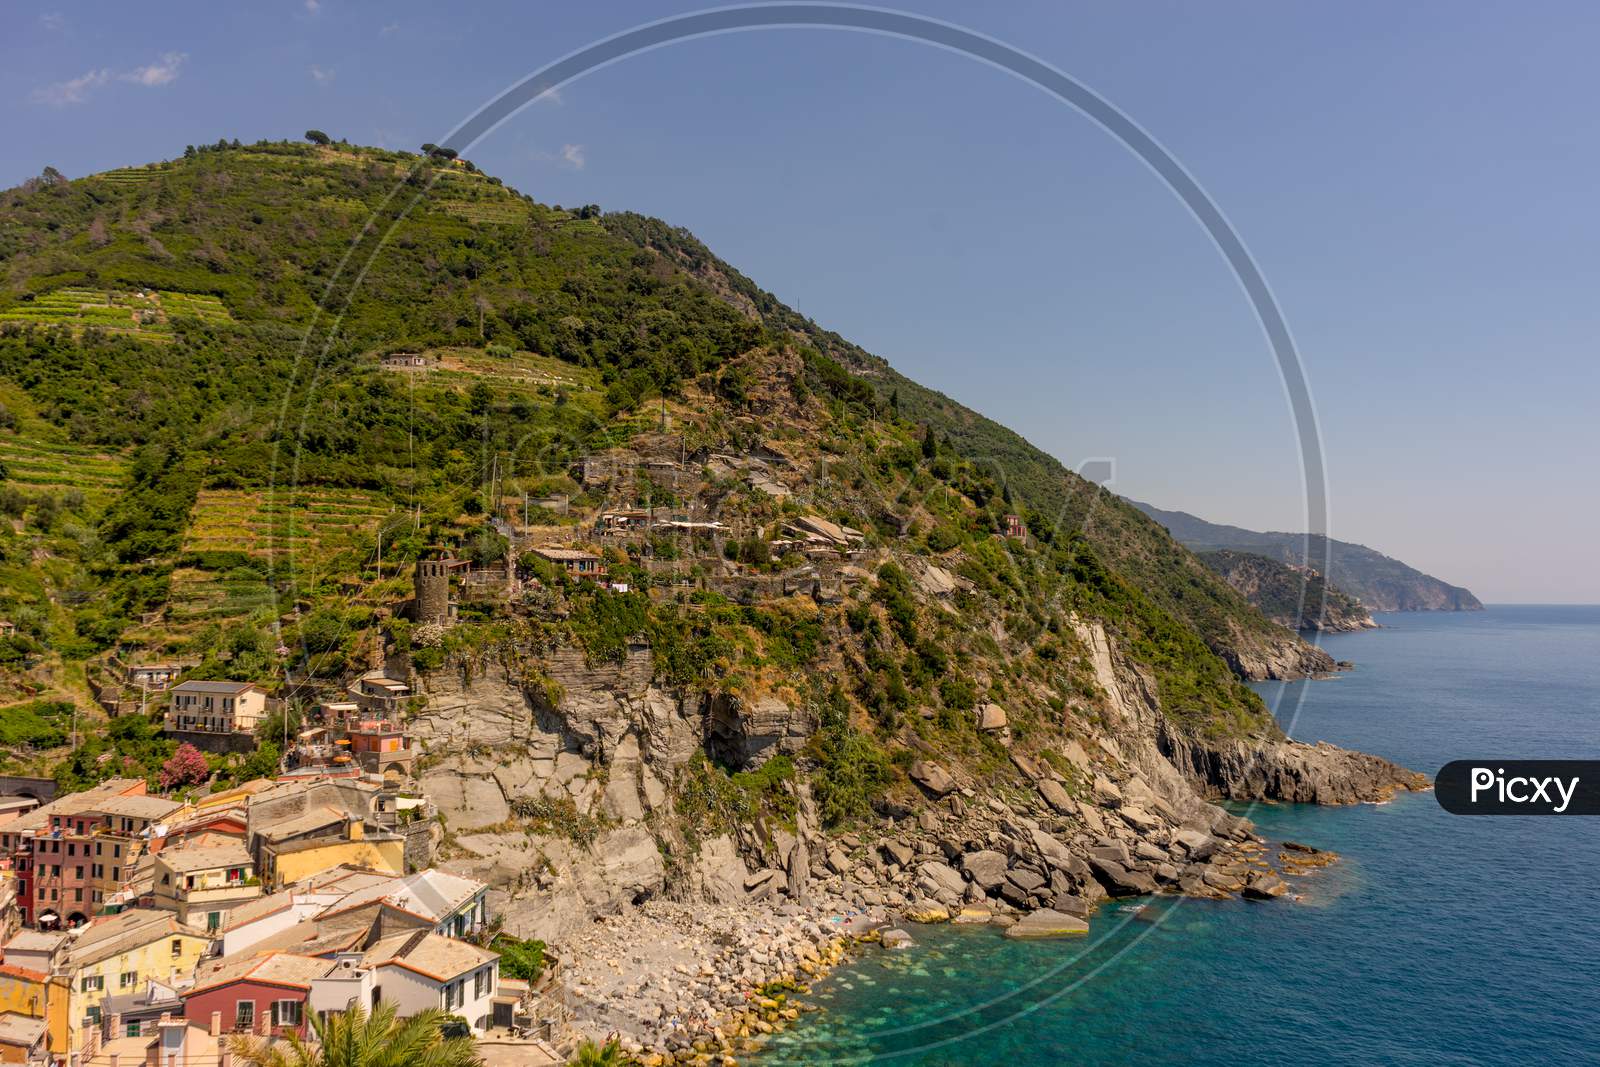 Italy, Cinque Terre, Vernazza, Vernazza, Scenic View Of Sea And Mountains Against Clear Sky